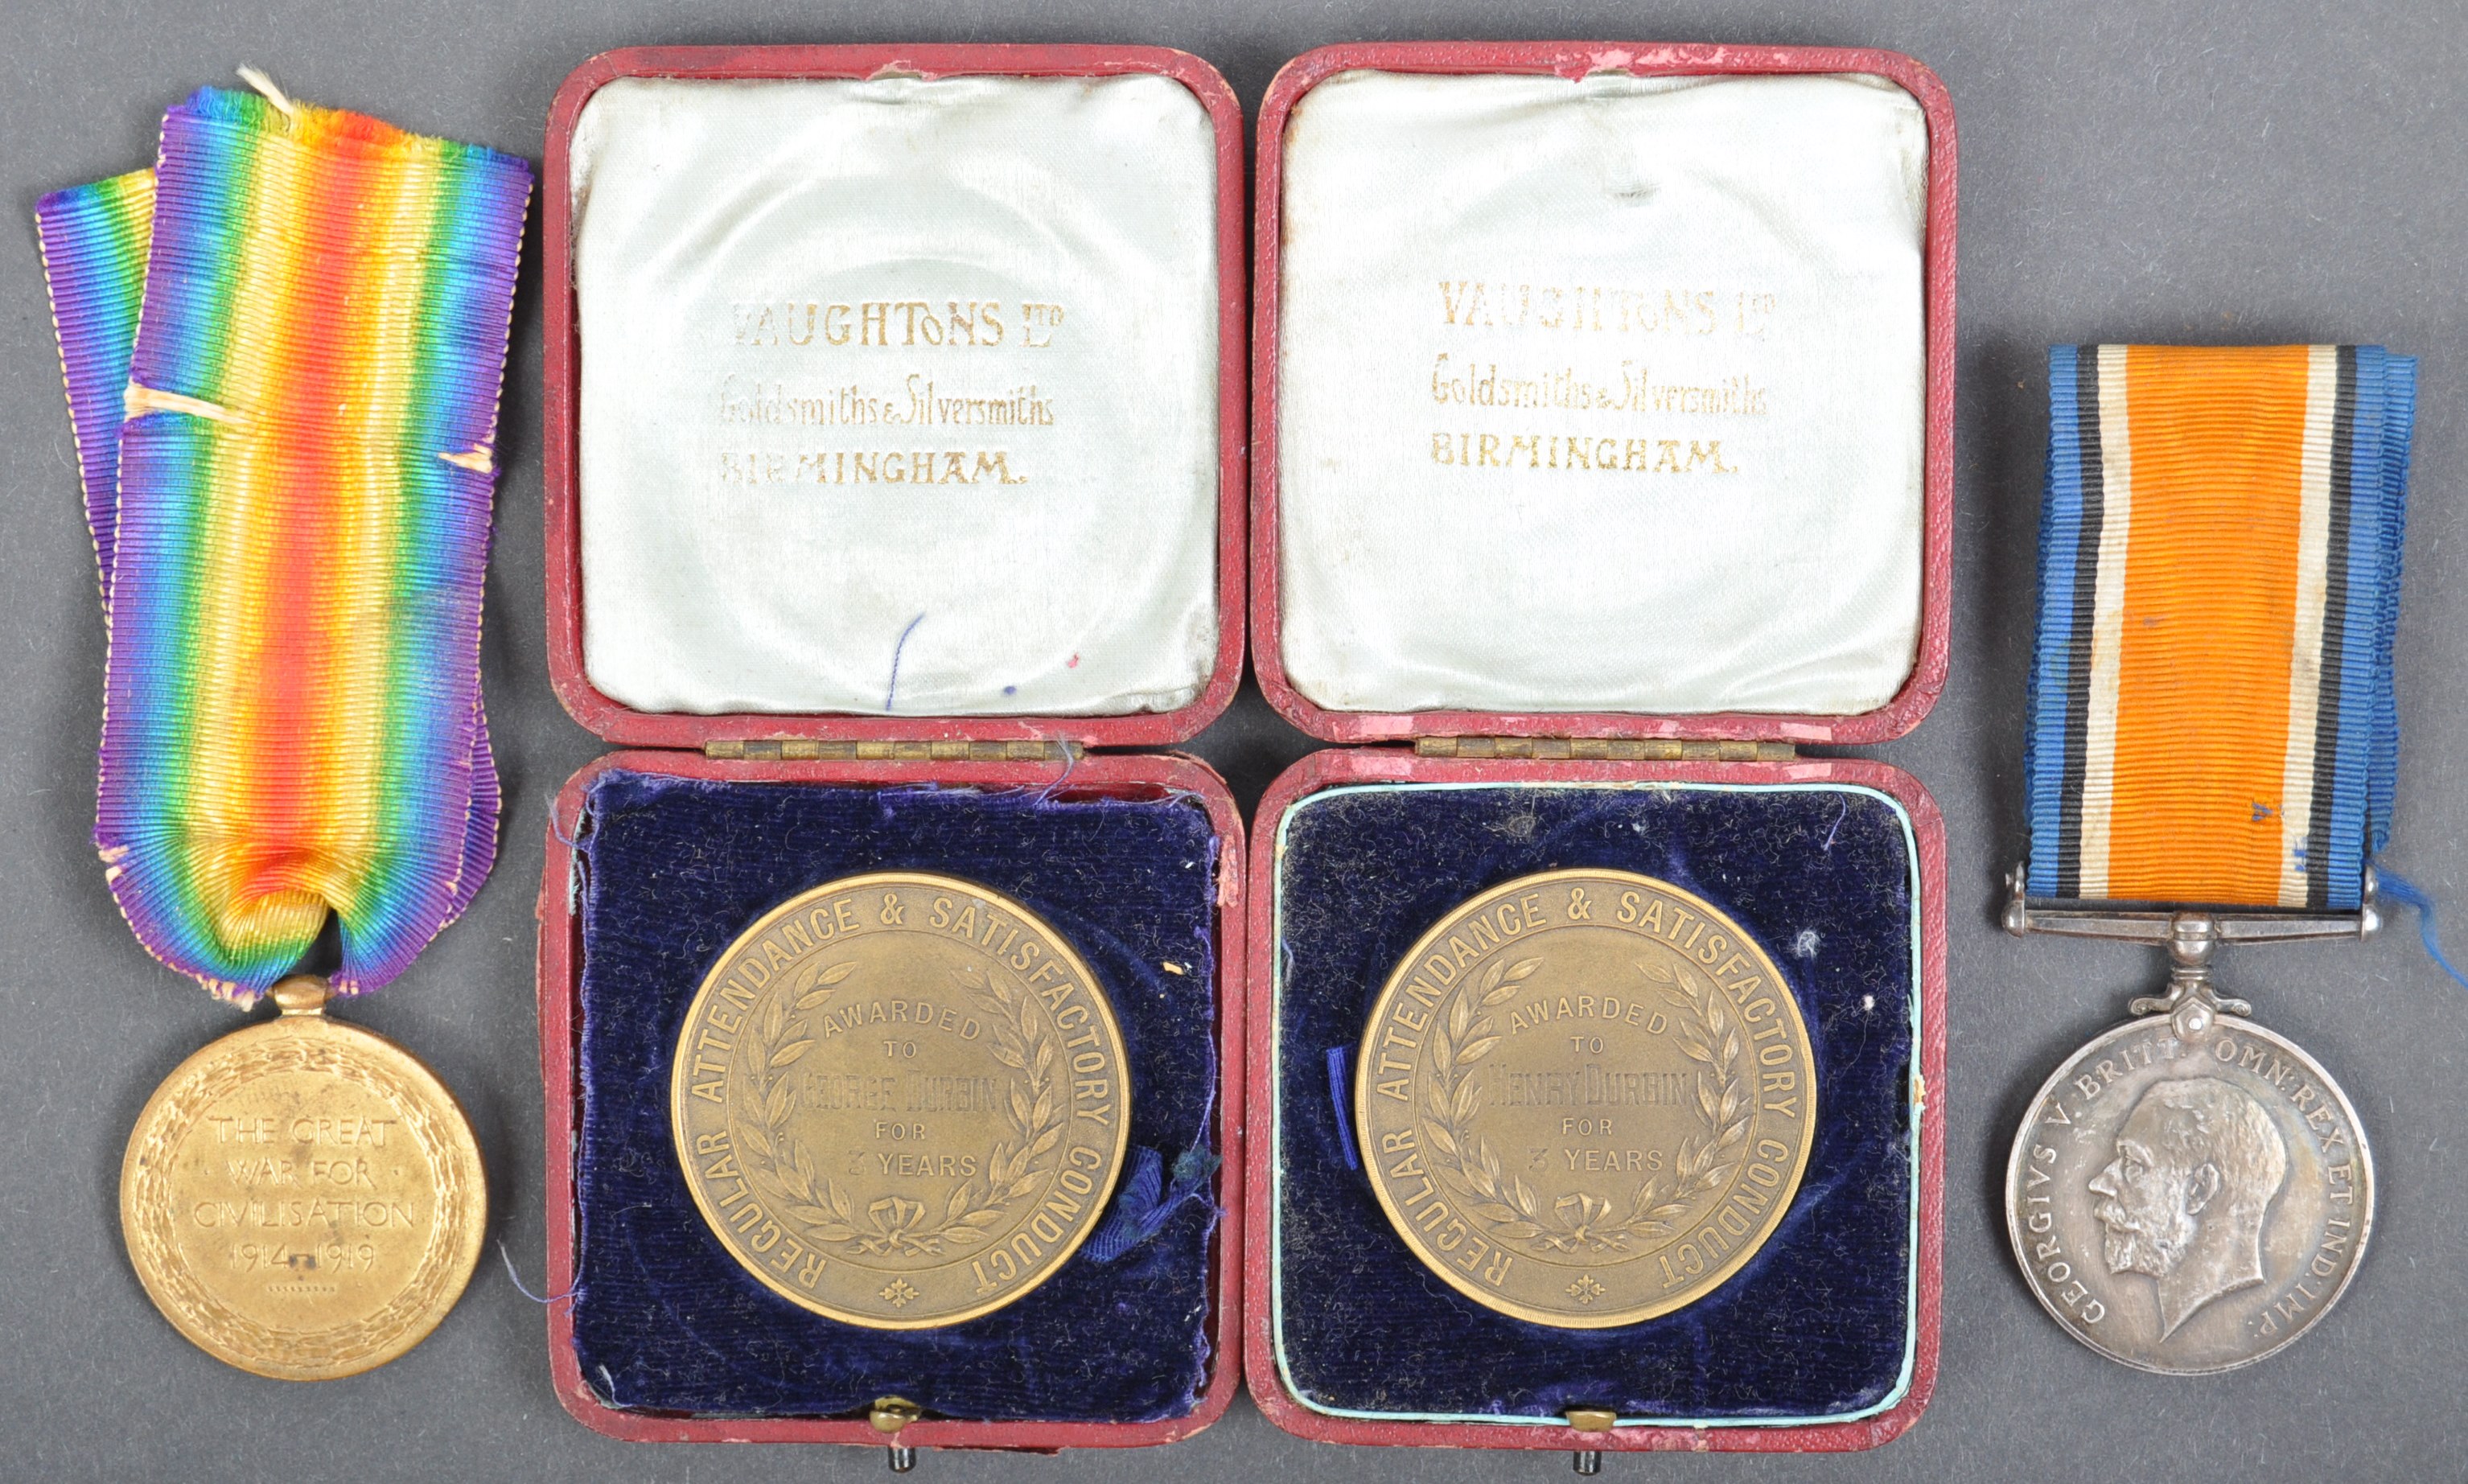 WWI FIRST WORLD WAR MEDAL PAIR & EFFECTS - PRIVATE IN ROYAL SUSSEX RGMT